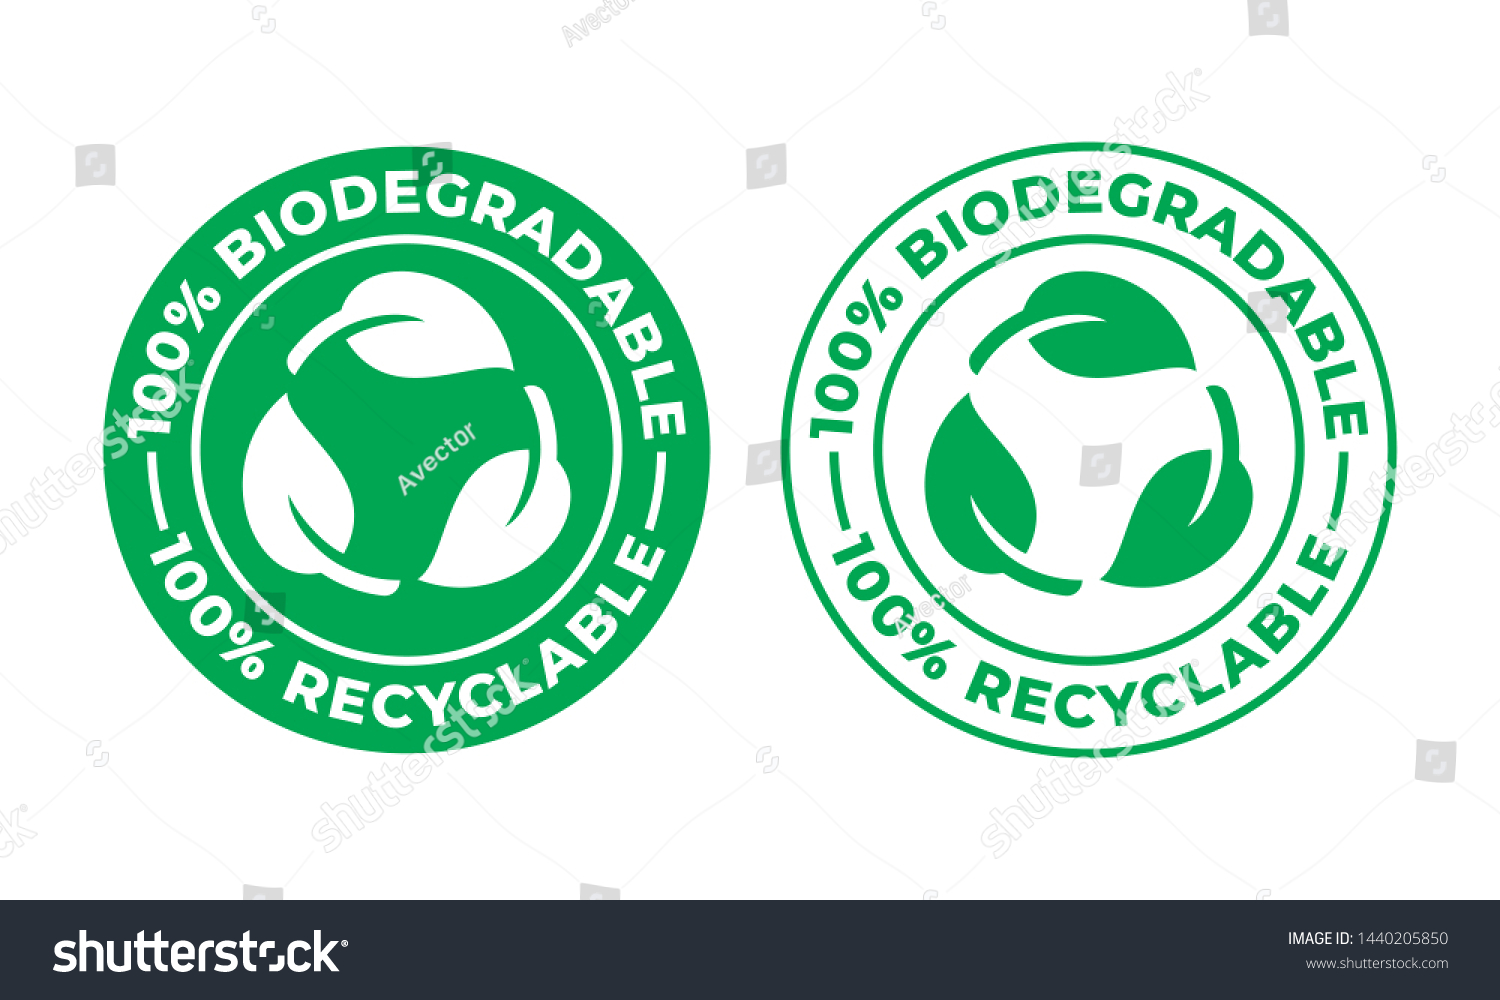 SVG of Biodegradable recyclable vector icon. 100 percent bio recycling and degradable package packet logo svg